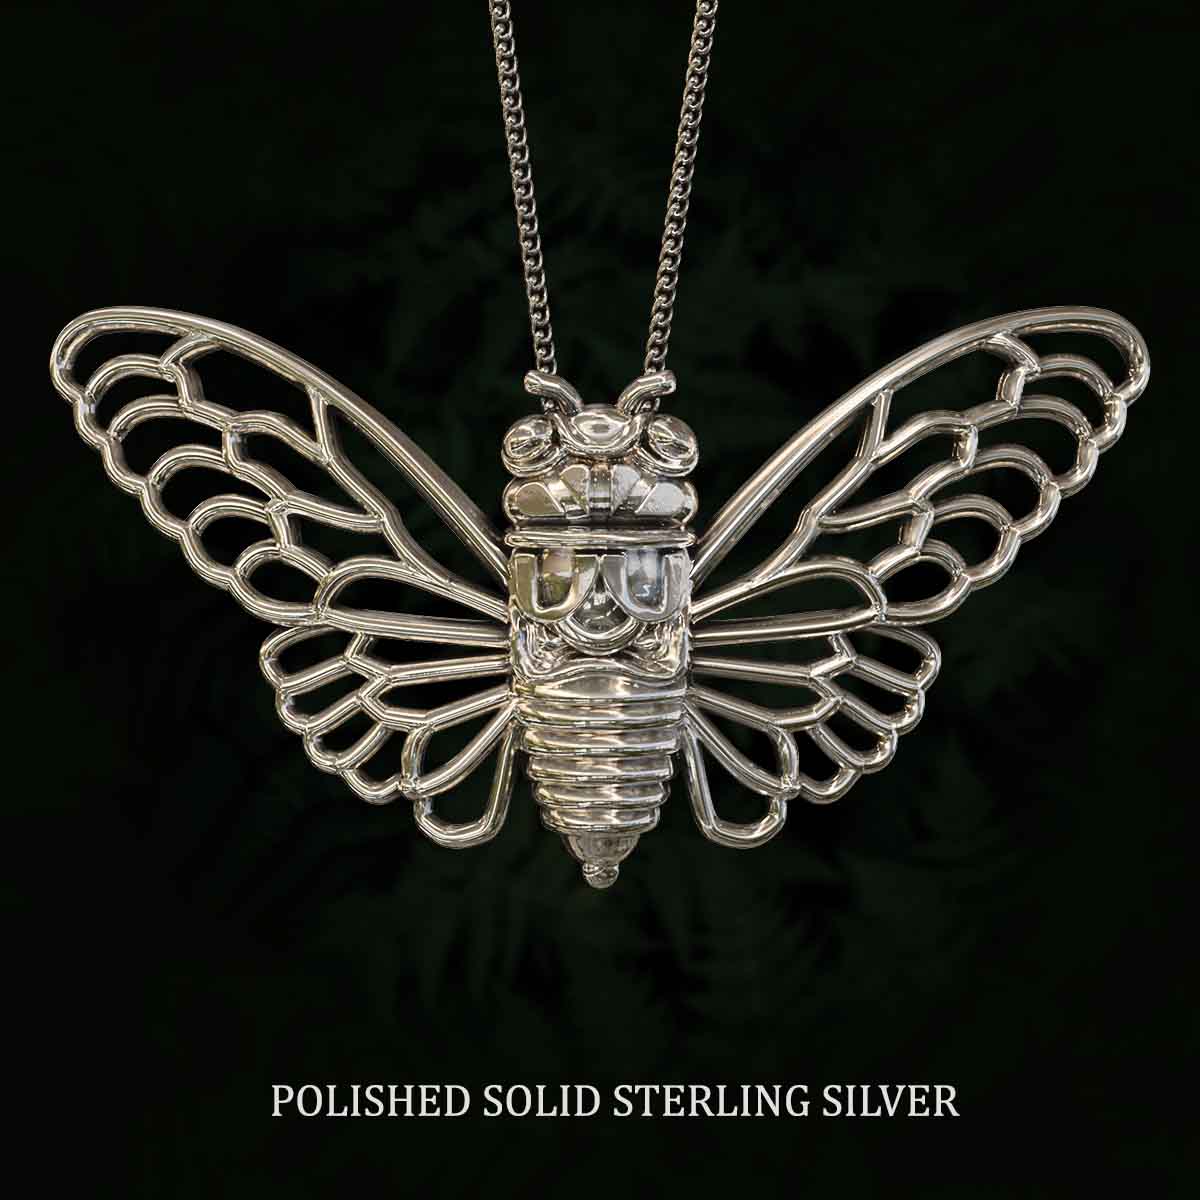     Polished-Solid-Sterling-Silver-Cicada-Pendant-Jewelry-For-Necklace